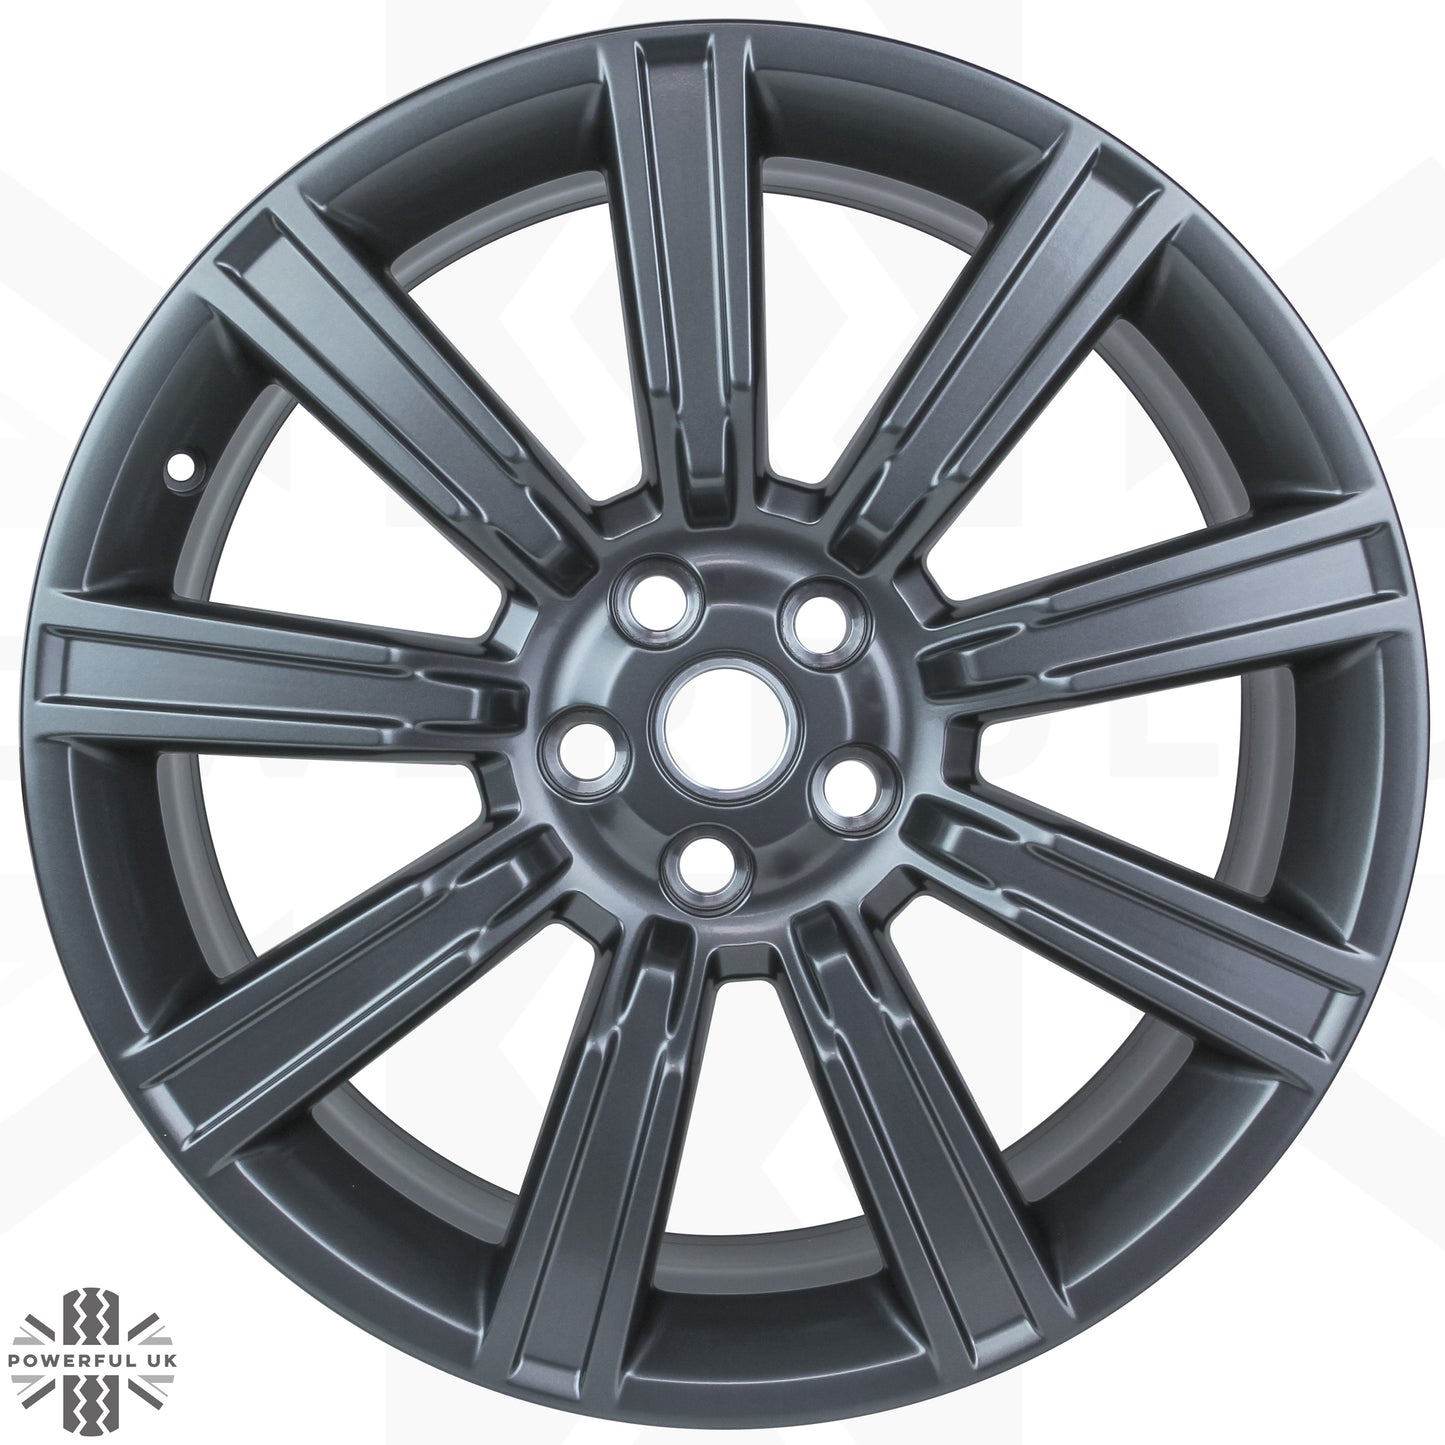 21" Forged Technical Grey Alloy Wheels - Set of 4 for Range Rover L405 Genuine